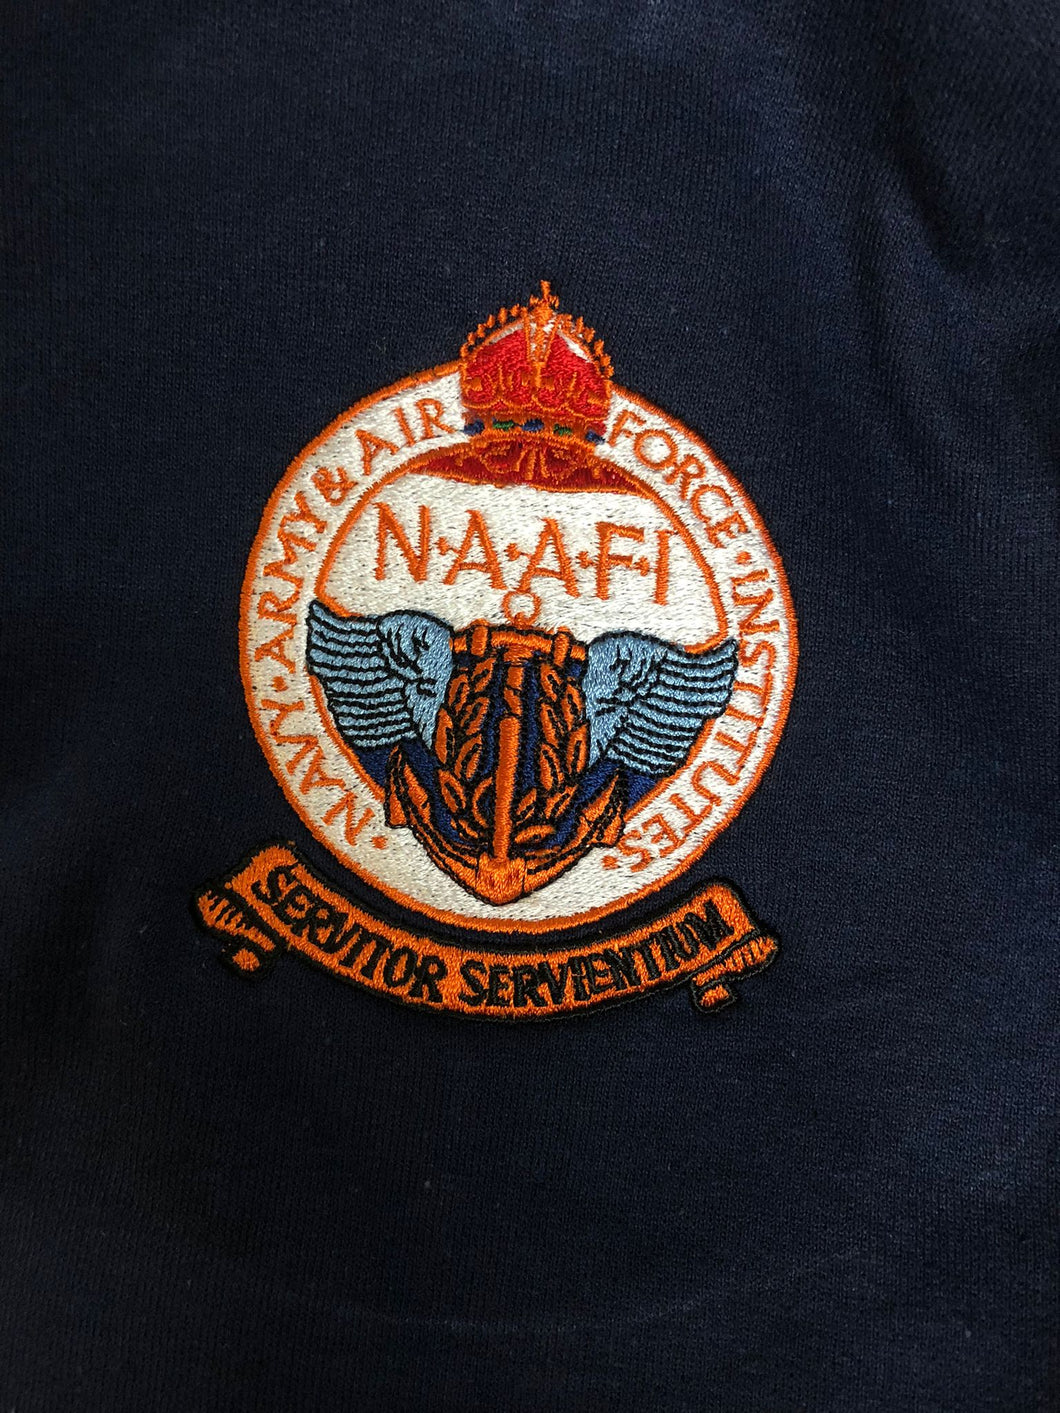 Navy Army Air Forces Institute (NAAFI) - Embroidered - Choose your Garment